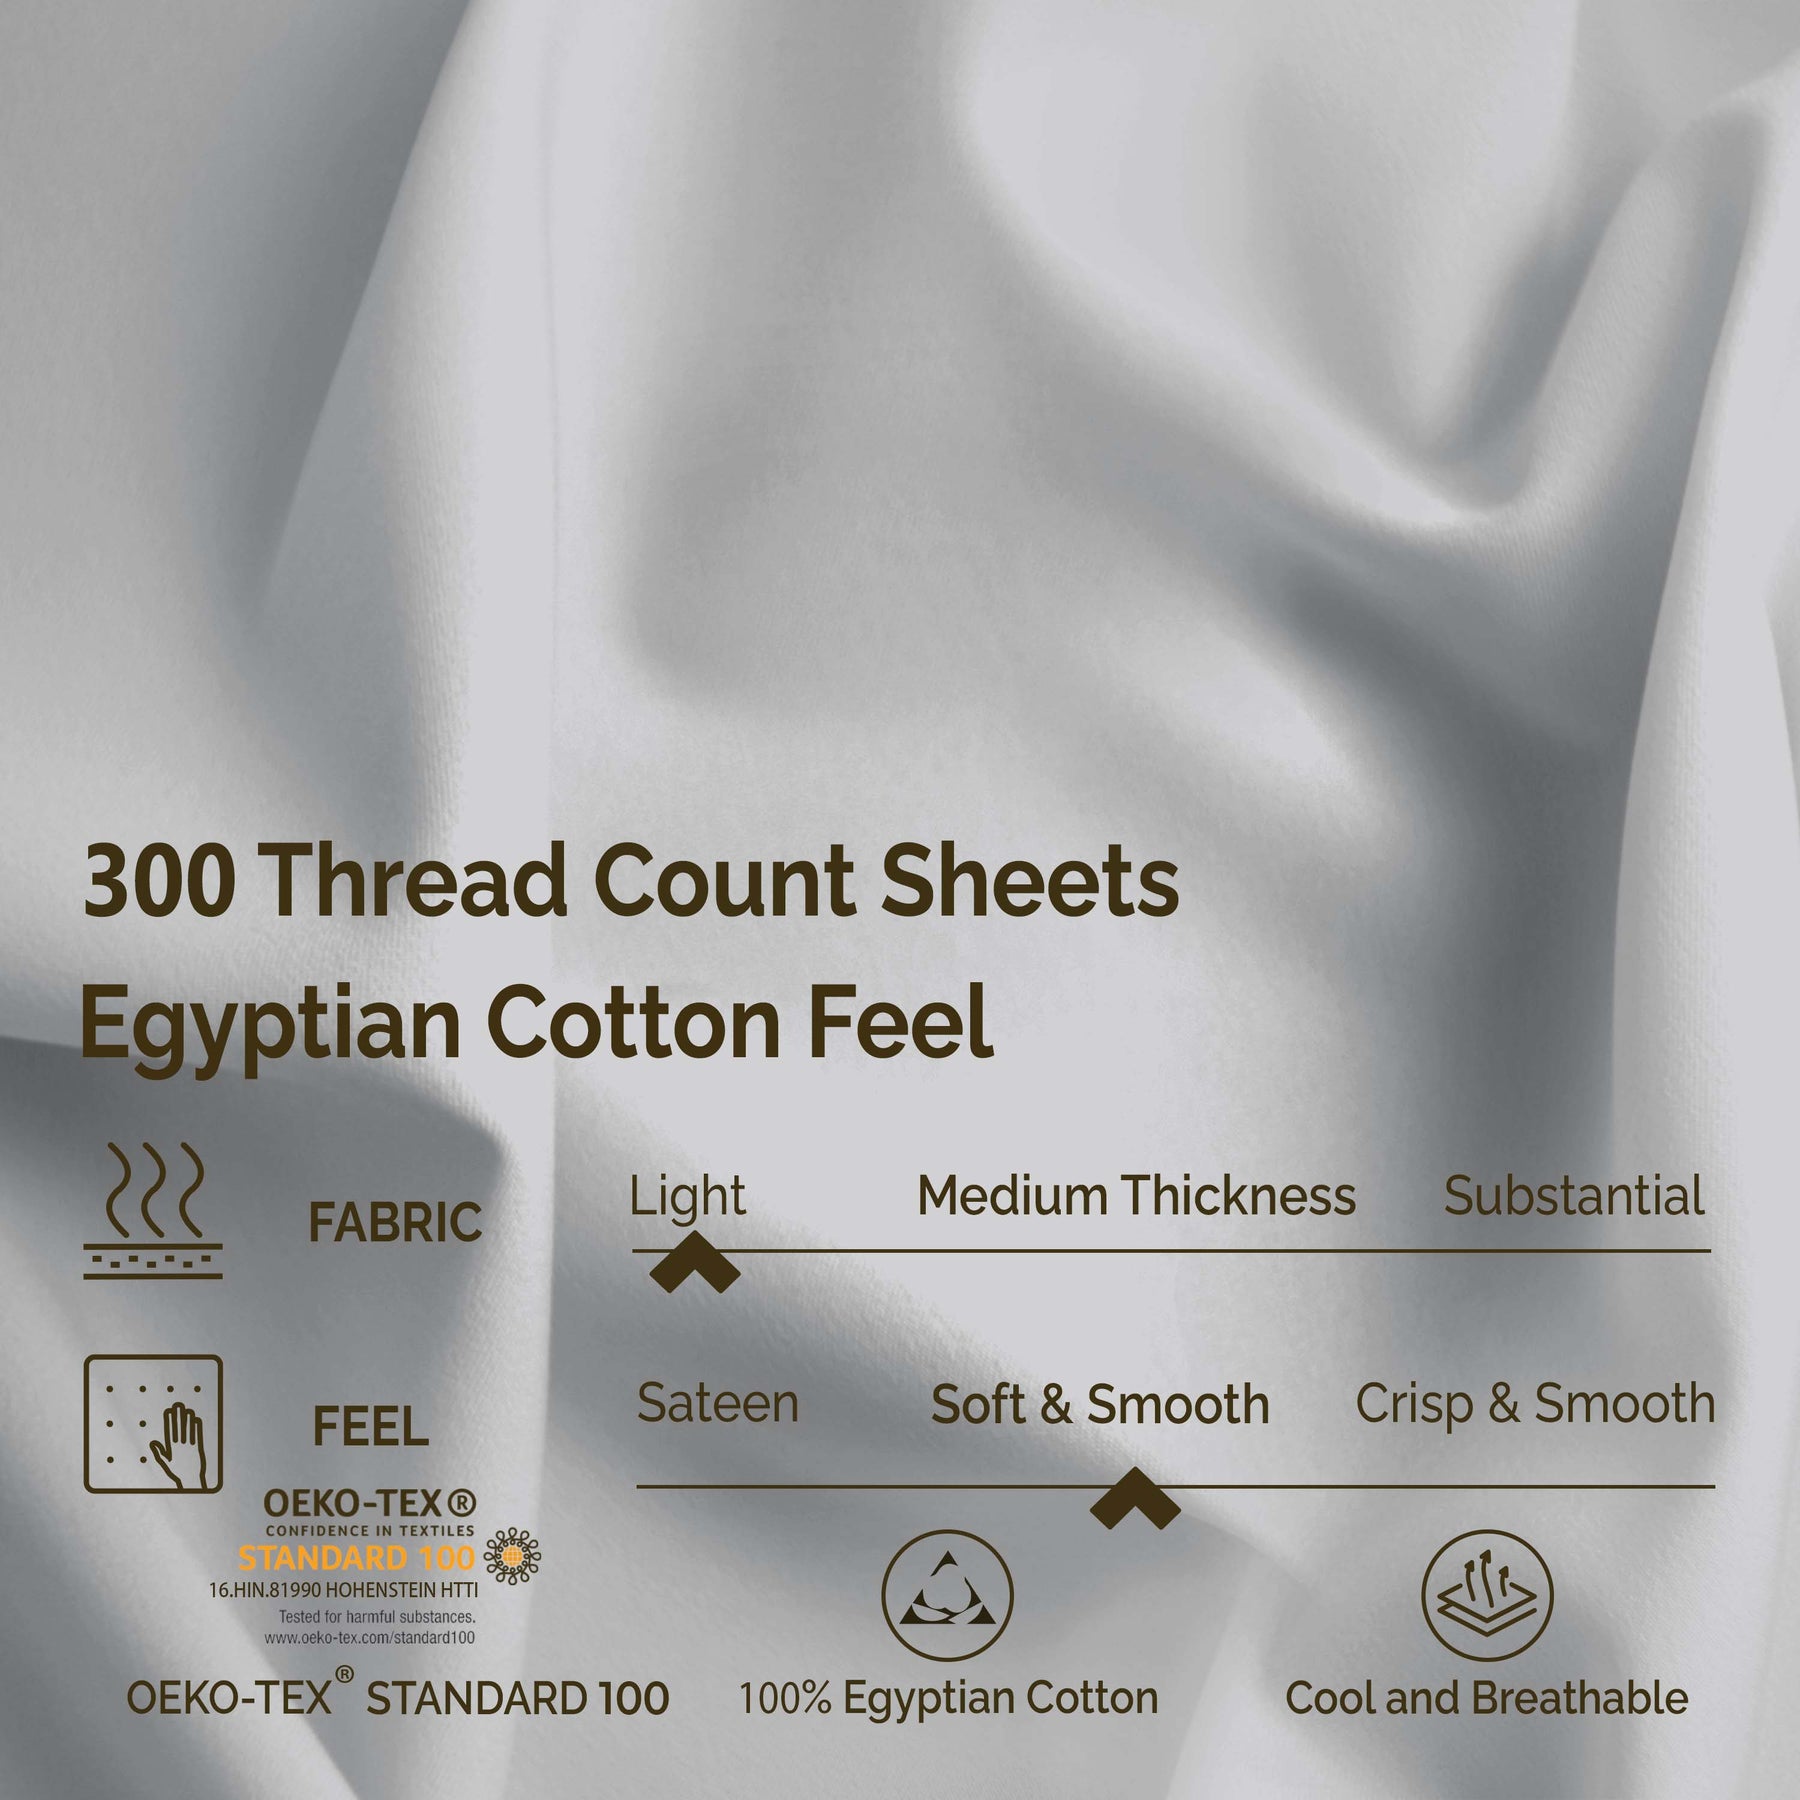 Superior Egyptian Cotton 300 Thread Count Solid Deep Pocket Bed Sheet Set - Light Grey